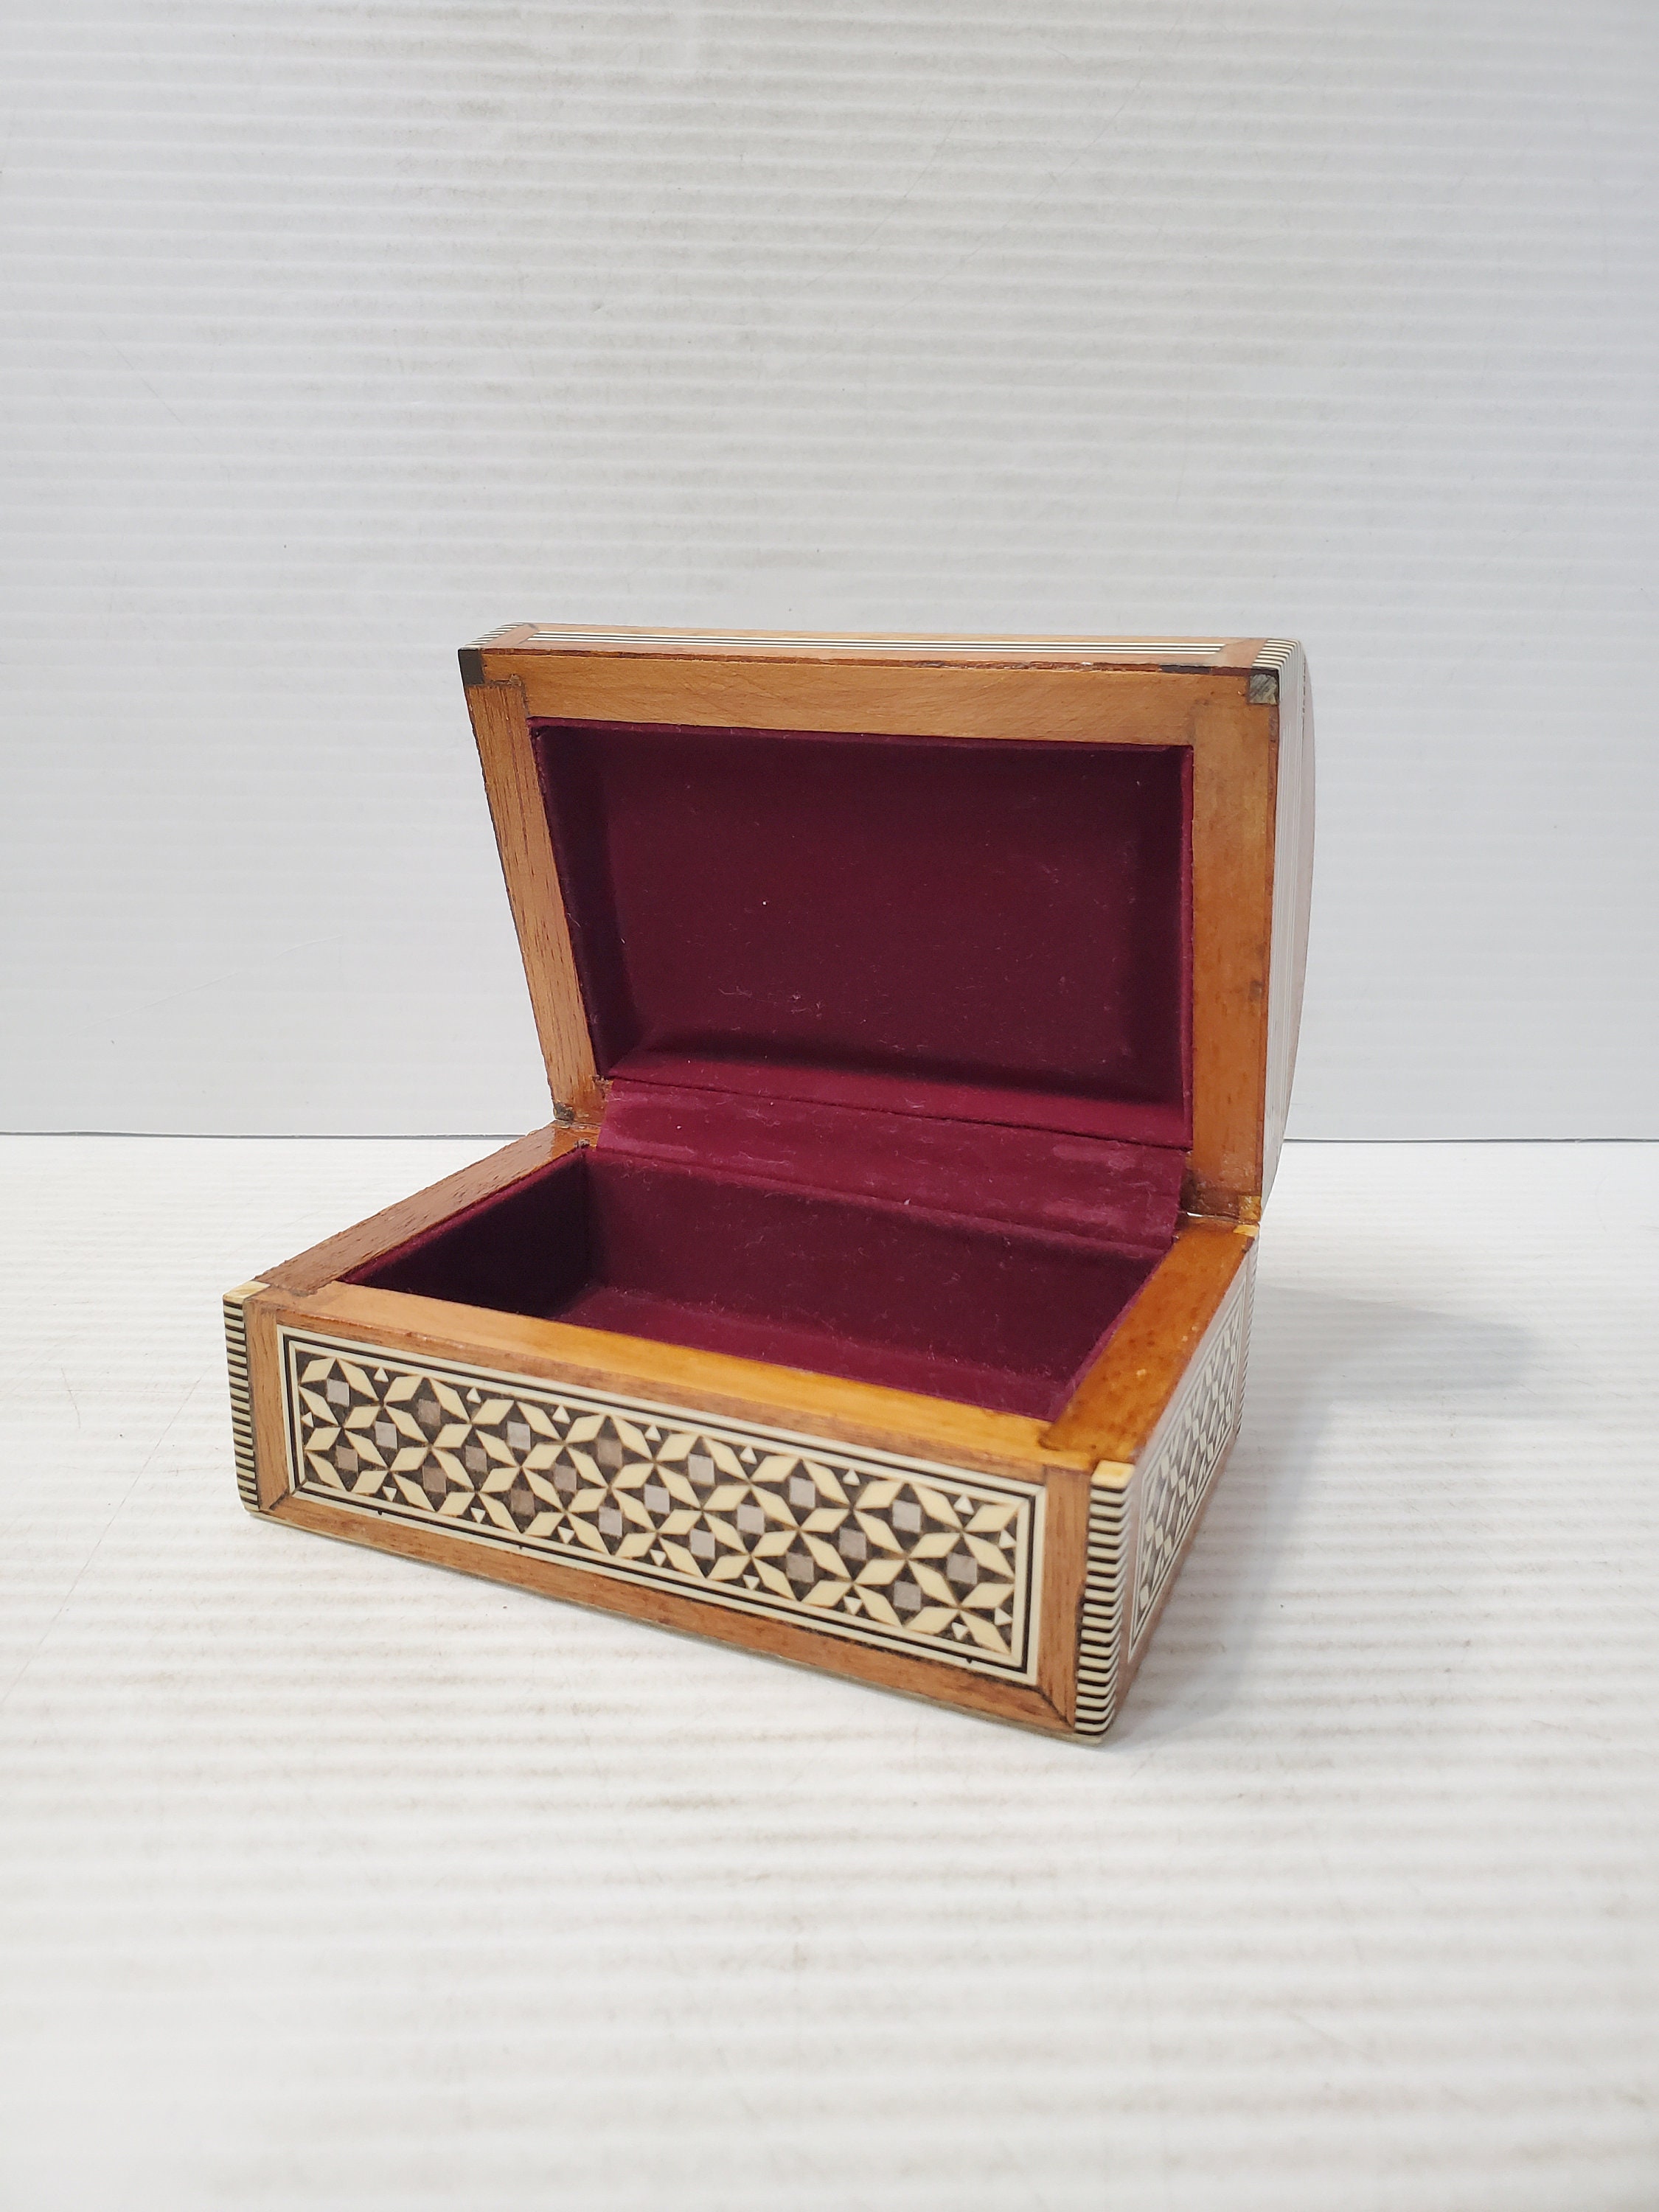 Nice Wooden Jewelry Box 3 Drawer with Inner Accessory on eBid